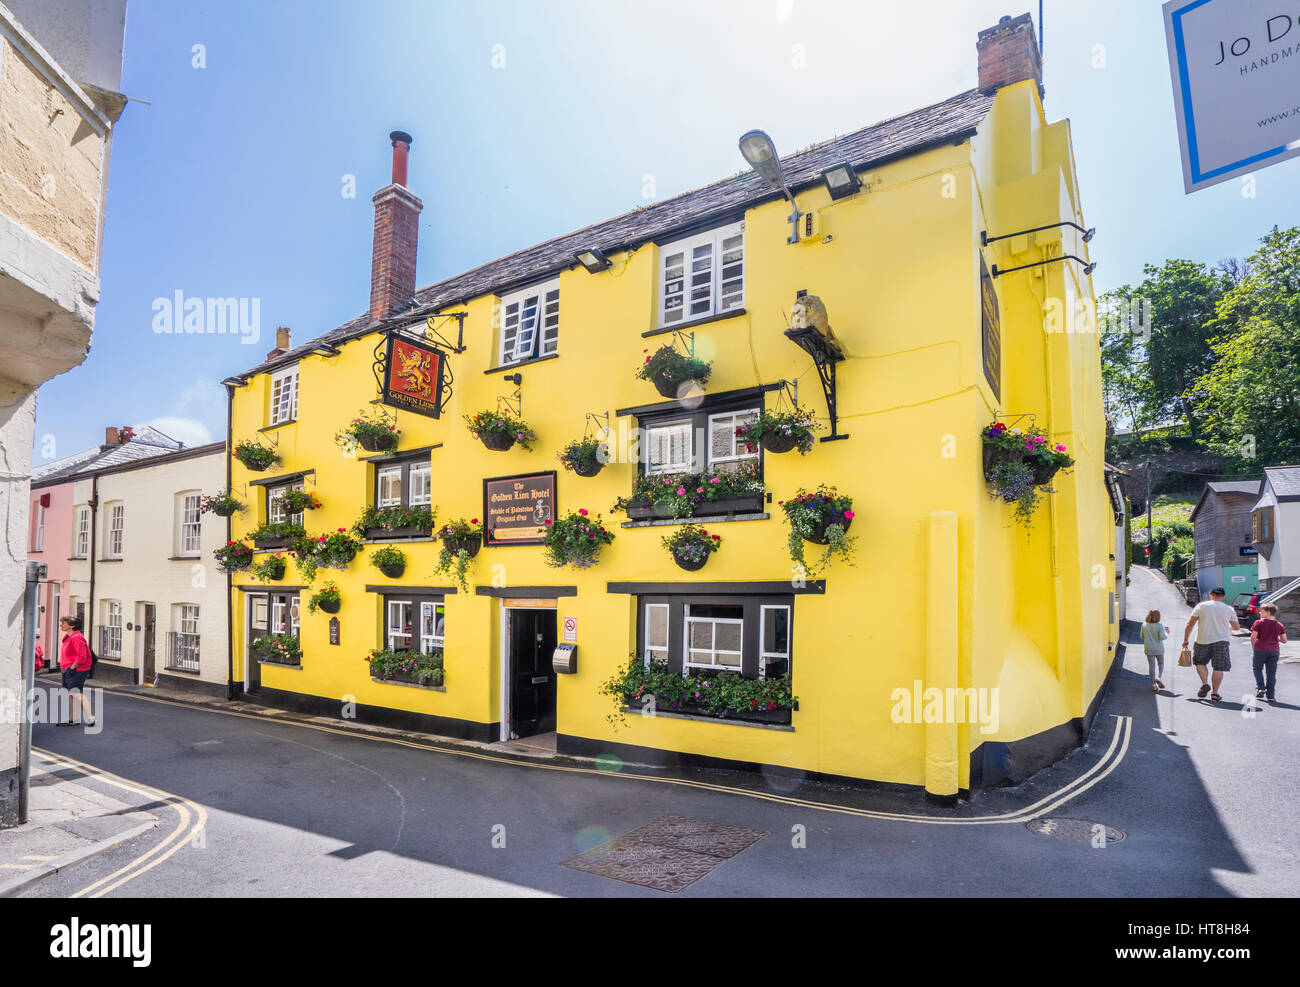 United Kingdom, South West England, Cornwall, Padstow, The Golden Lion Hotel, the oldest inn in Padstow Stock Photo